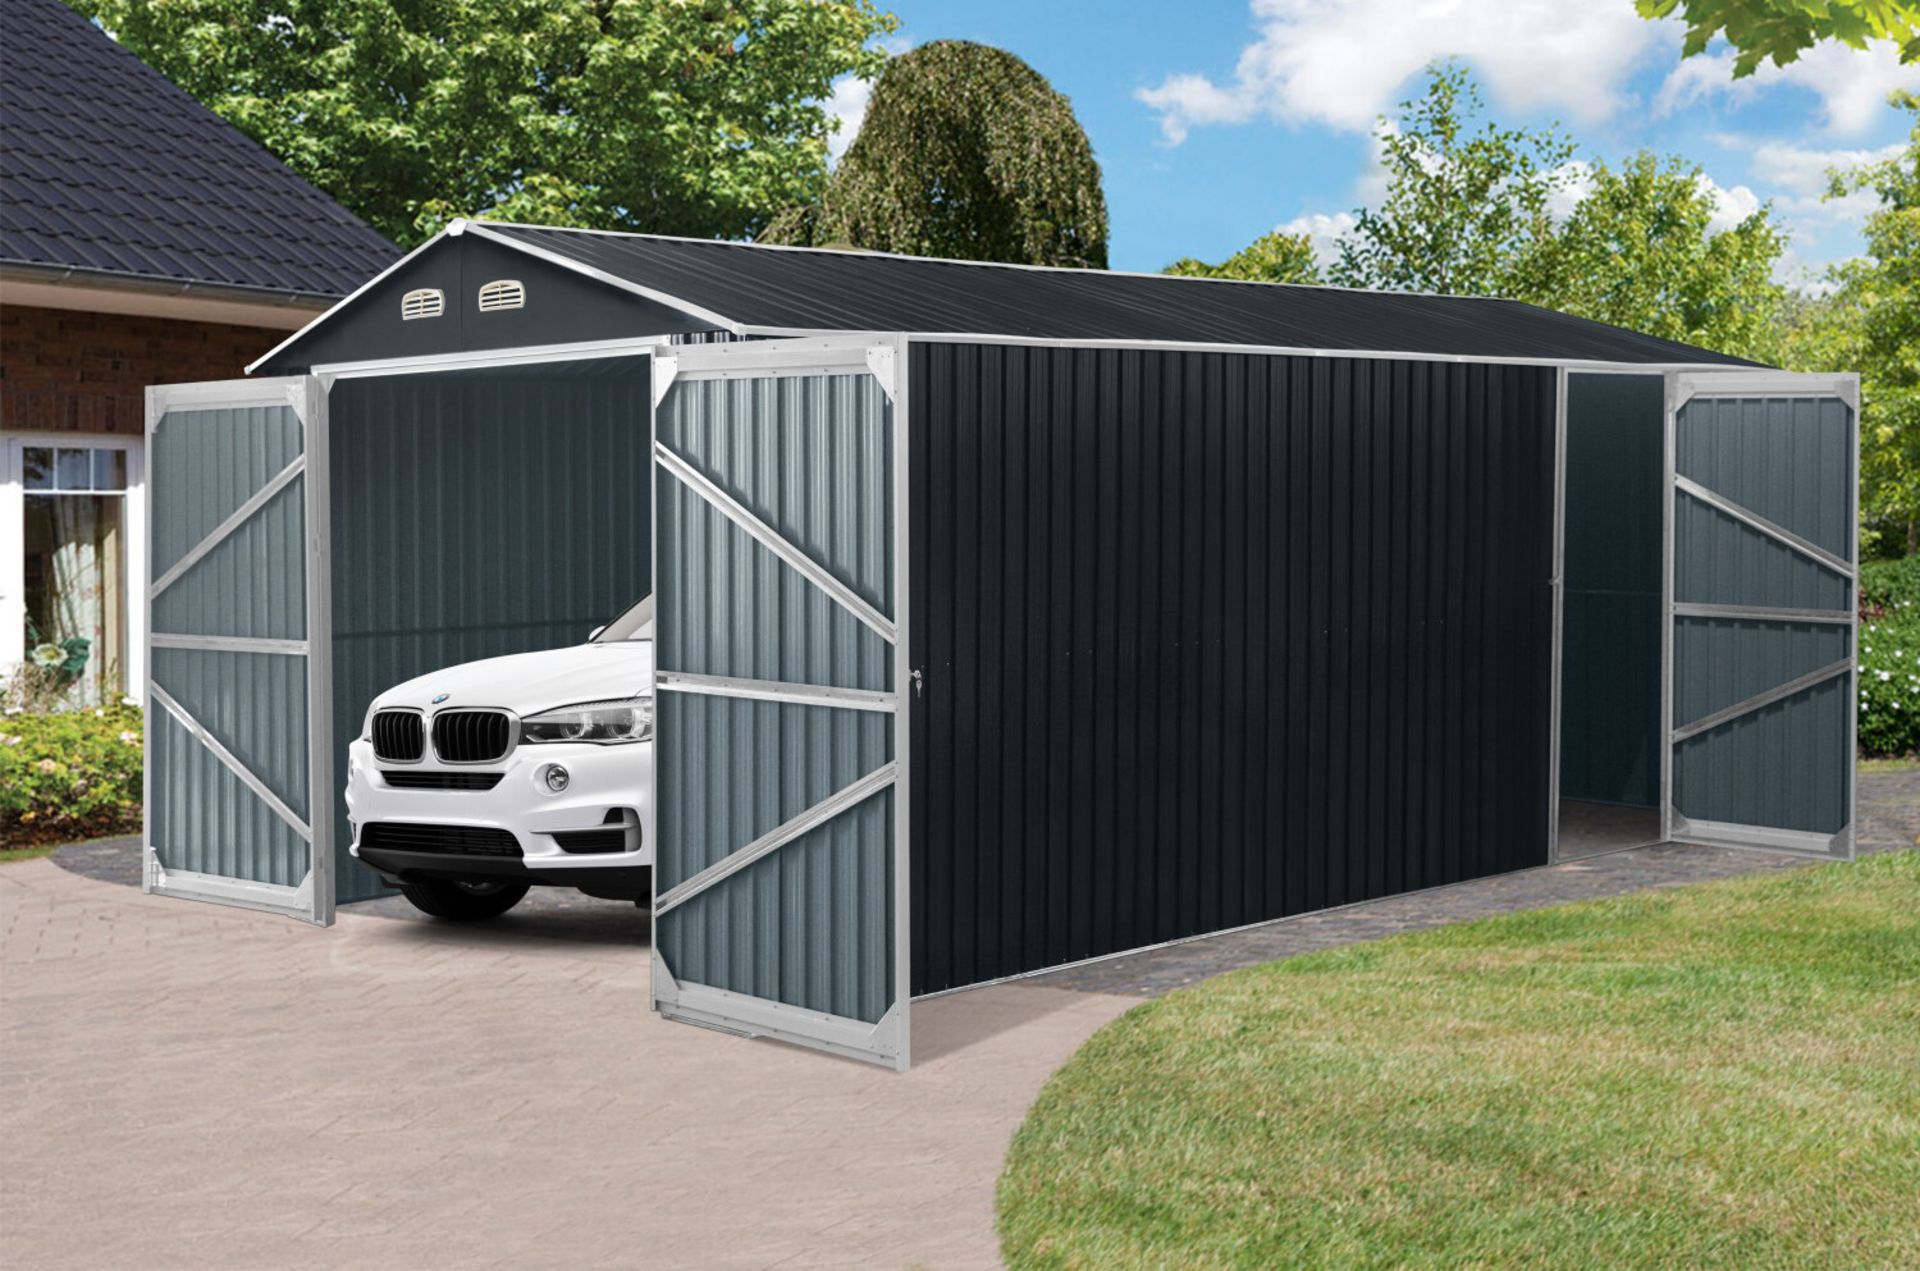 TMG-MS1020A TMG INDUSTRIAL 10' X 20' METAL GARAGE SHED WITH DOUBLE FRONT DOORS, 7'8'' PEAK HEIGHT, - Image 2 of 9